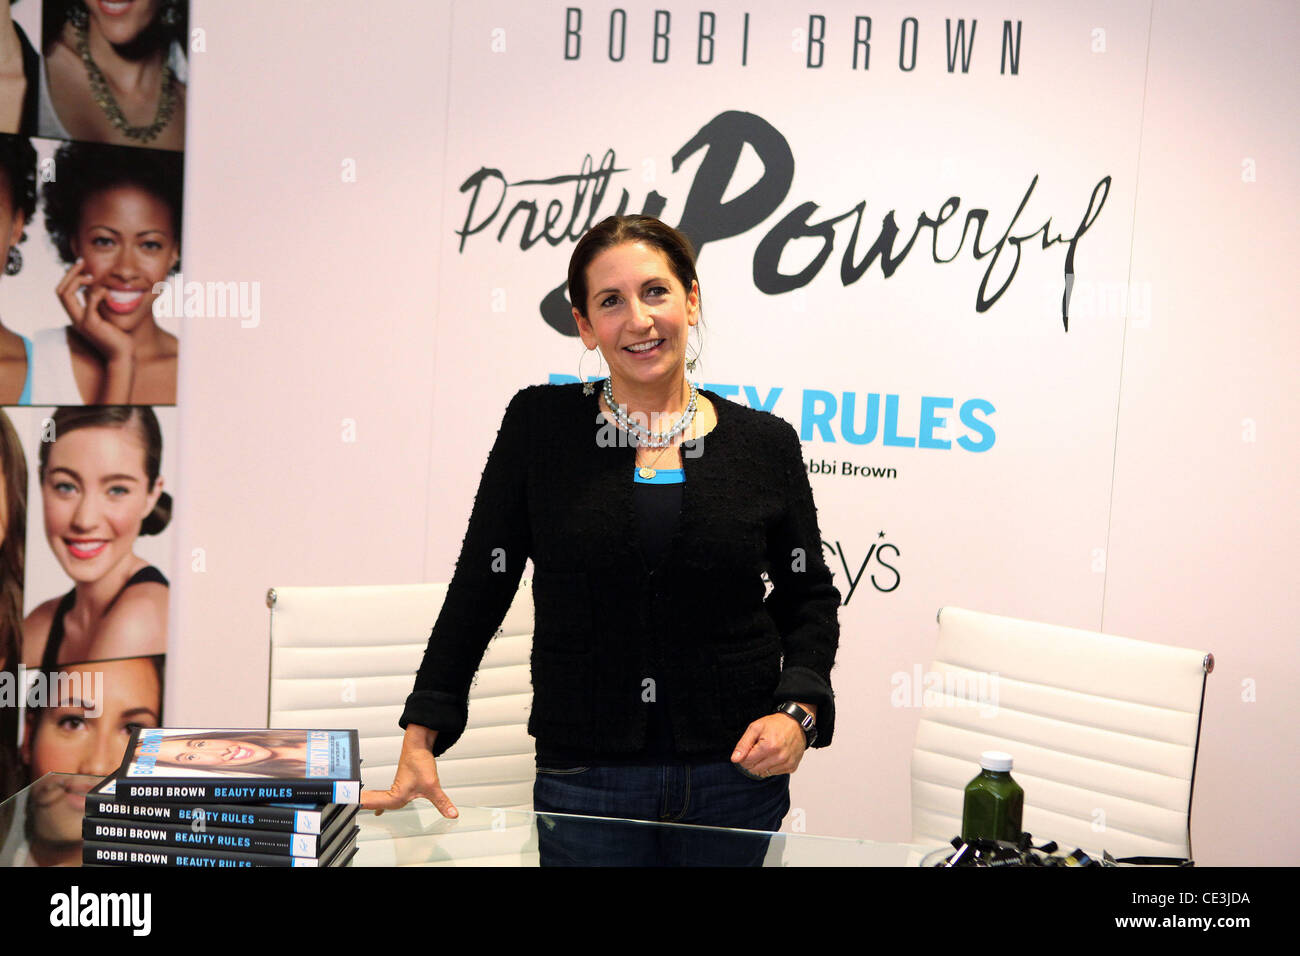 Makeup Artist Bobbi Brown signs her new book 'Beauty Rules' at Macy's Herald Square New York City, USA - 09.11.10 Stock Photo